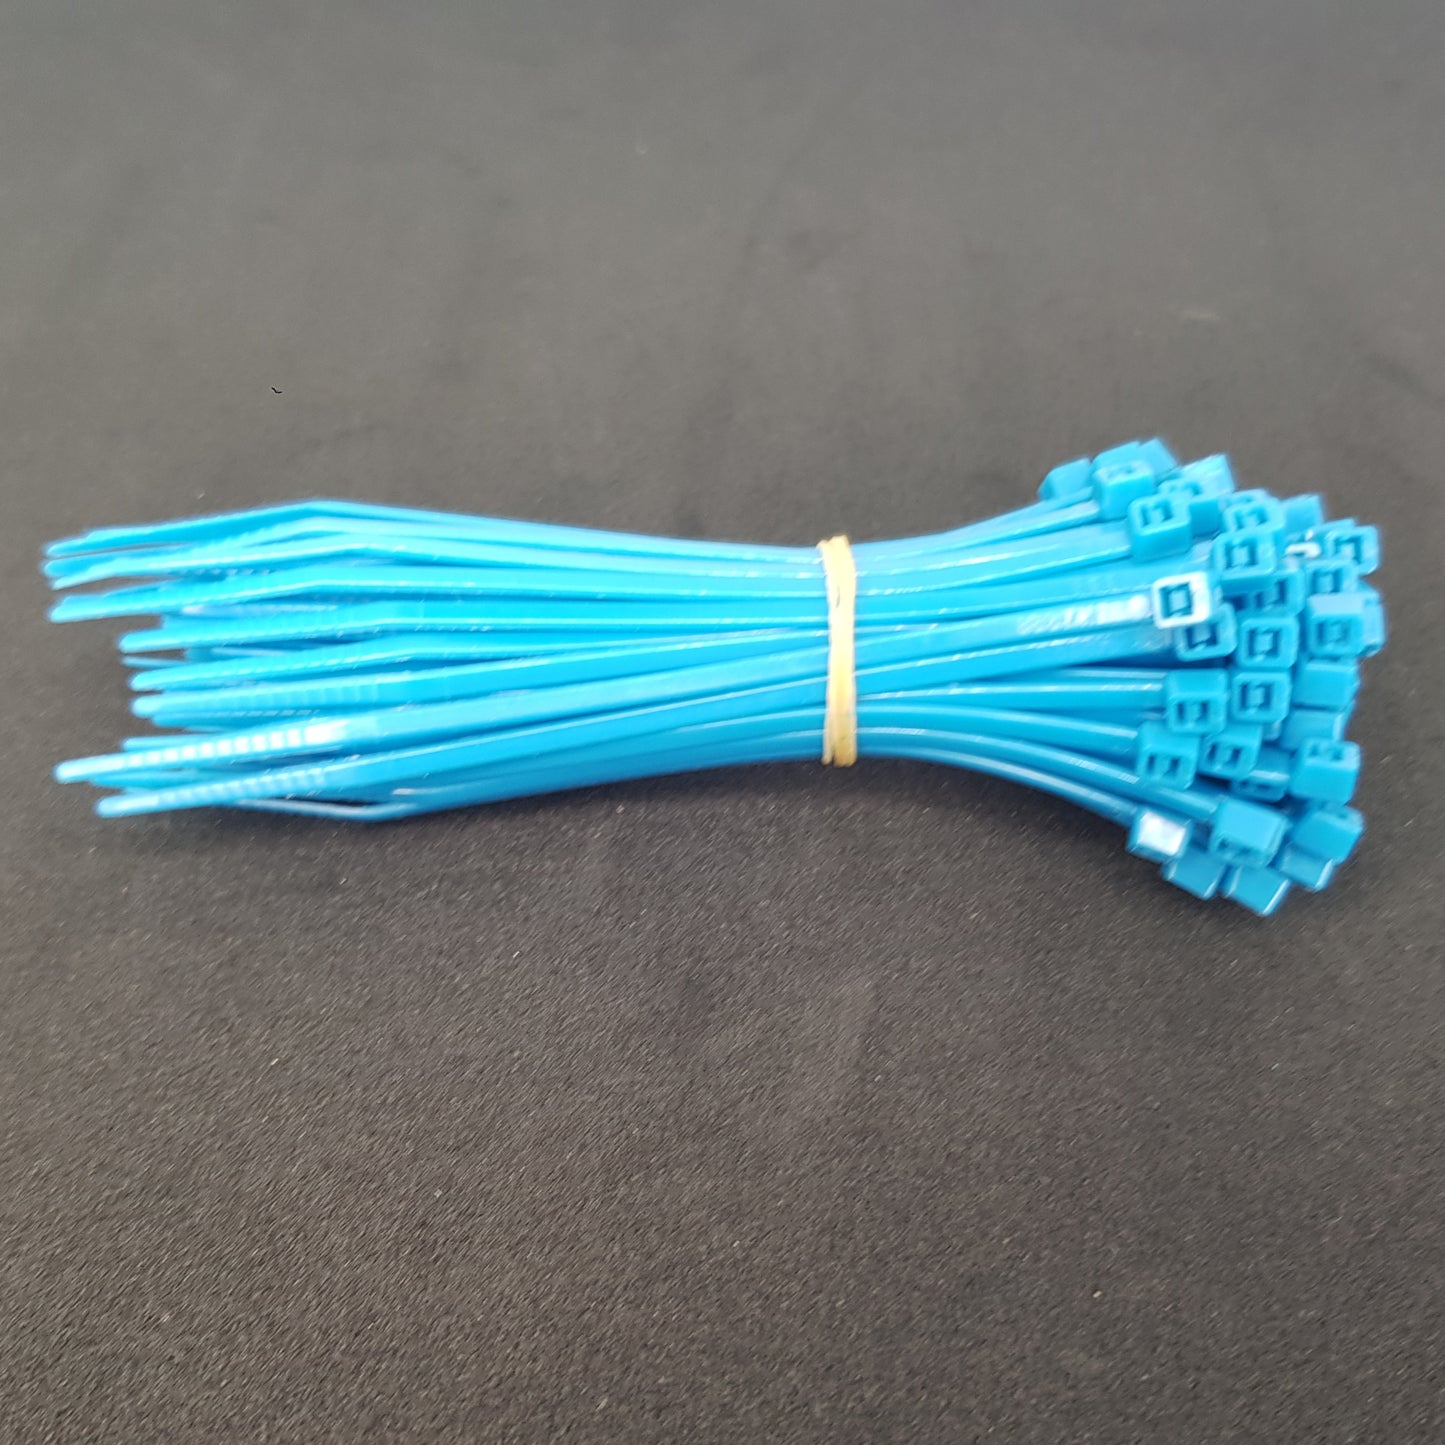 Multicomp PRO engineering cable ties